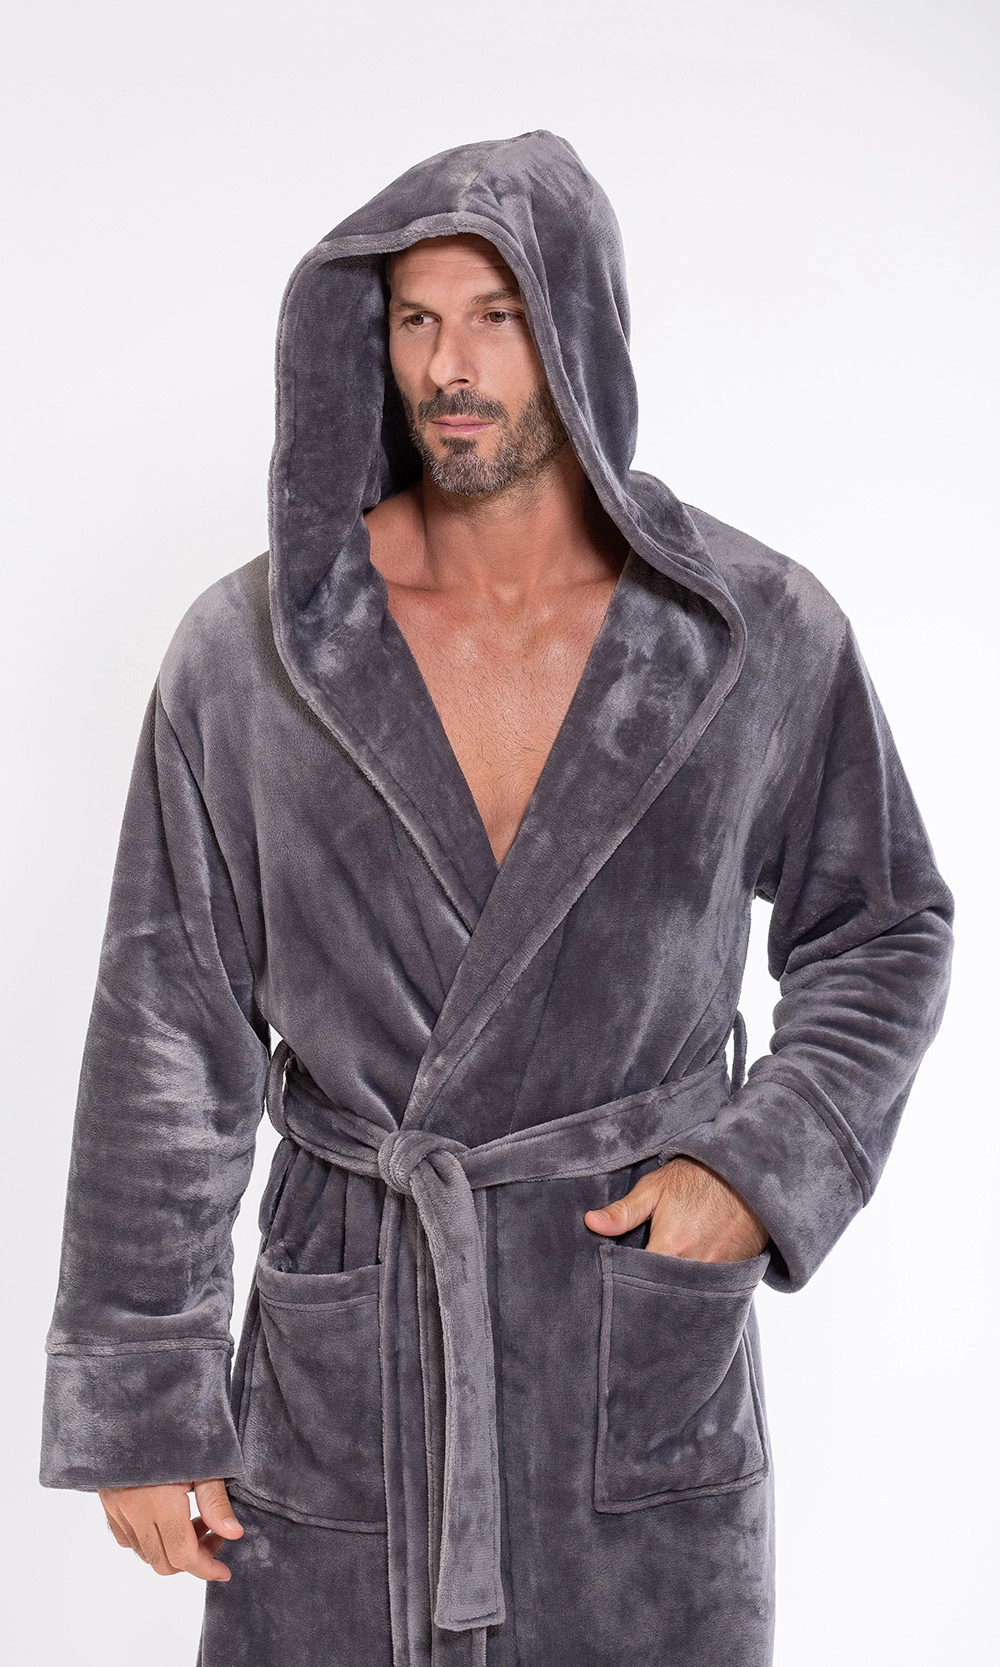 Mens Fleece Hooded Robe Soft Fluffy Thick Warm Dressing Gown With Hood  Nightwear